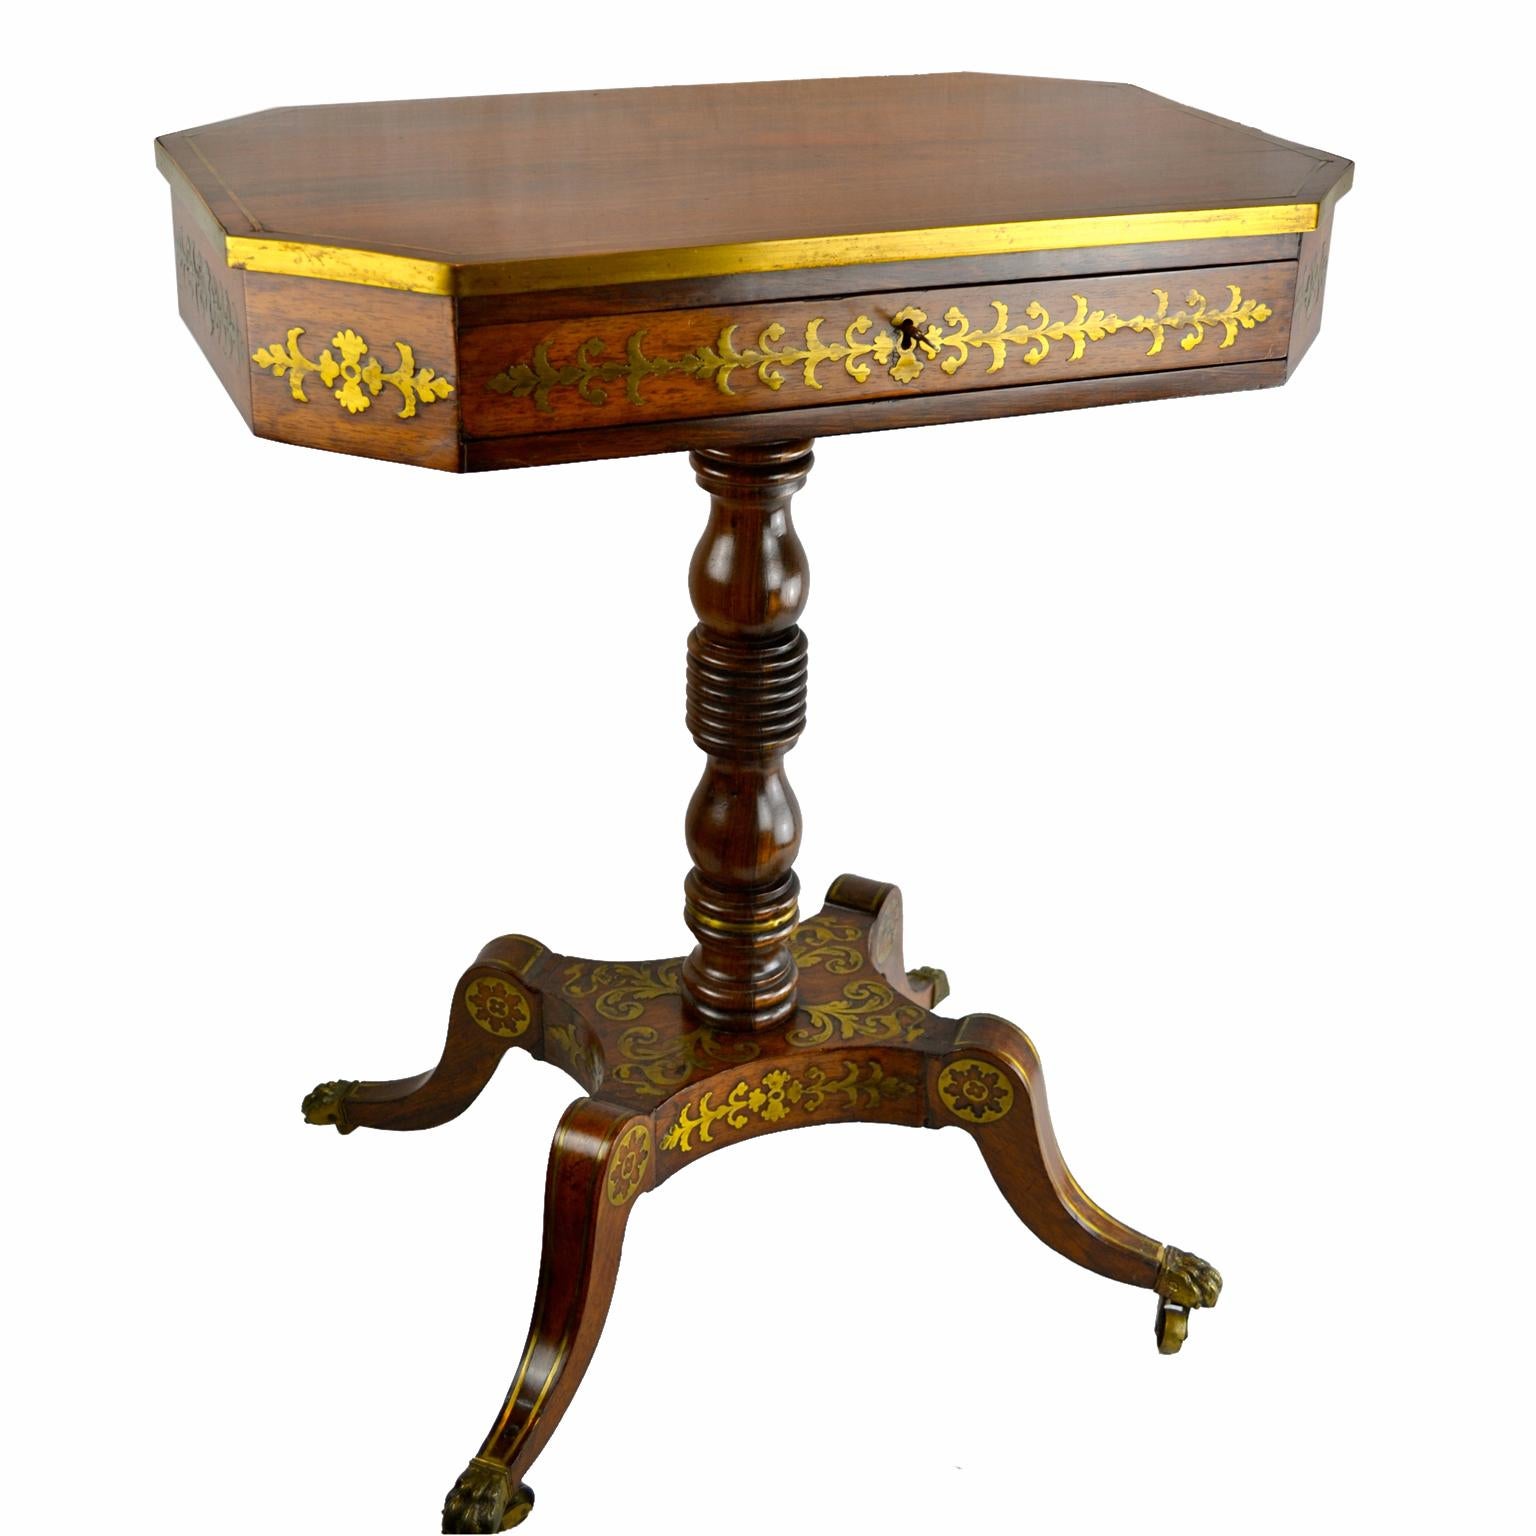 Hand-Crafted Early 19th Century English Regency Occasional Table